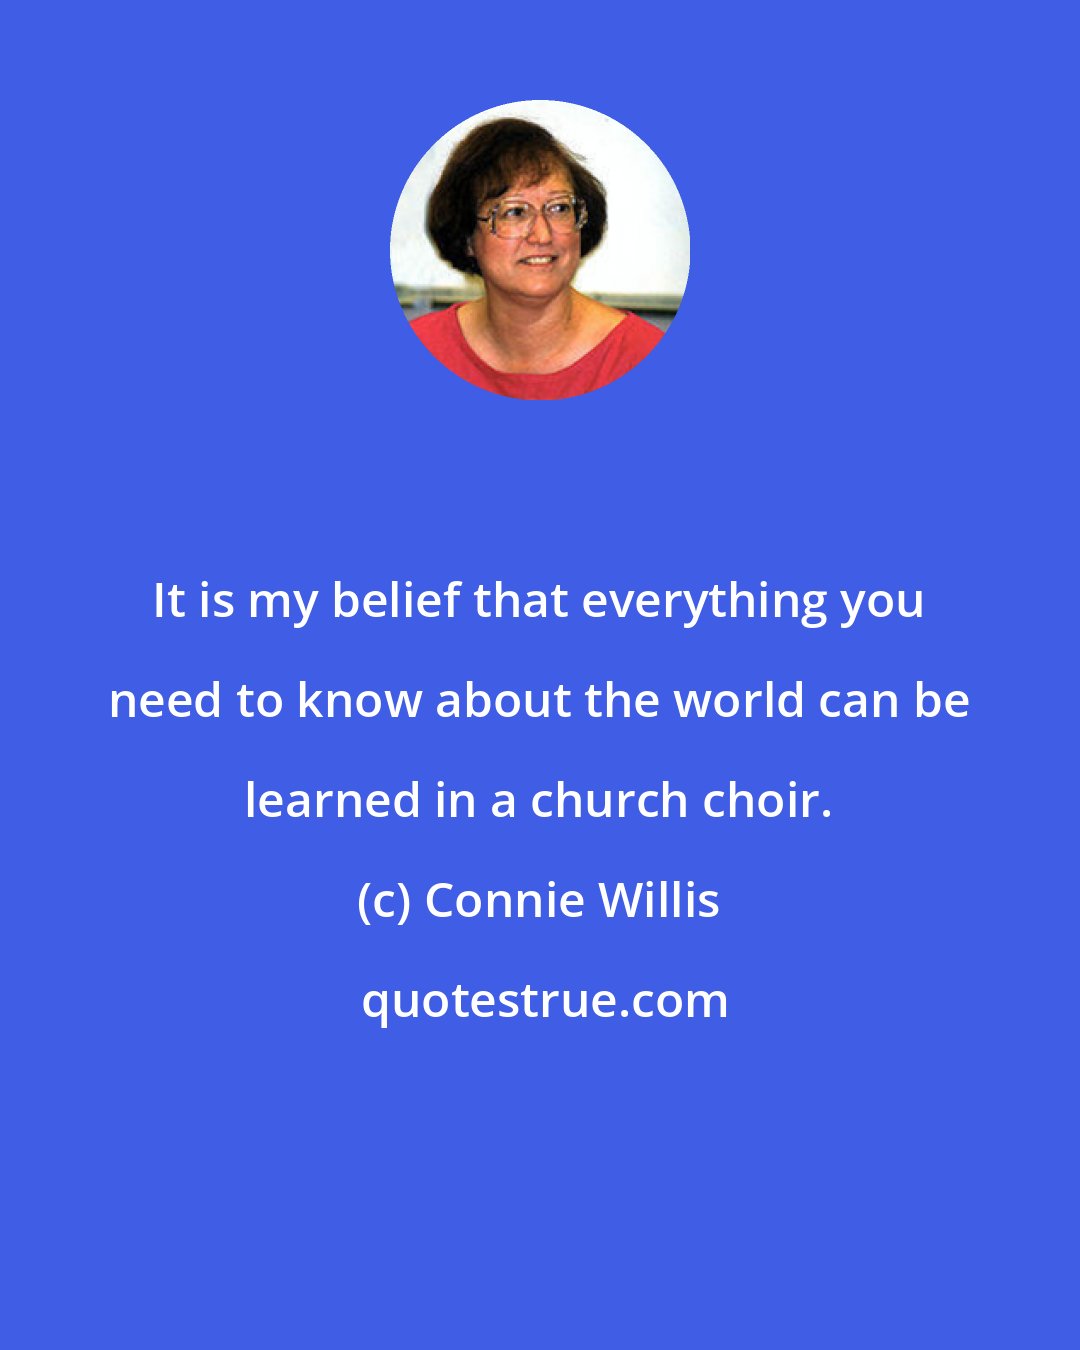 Connie Willis: It is my belief that everything you need to know about the world can be learned in a church choir.